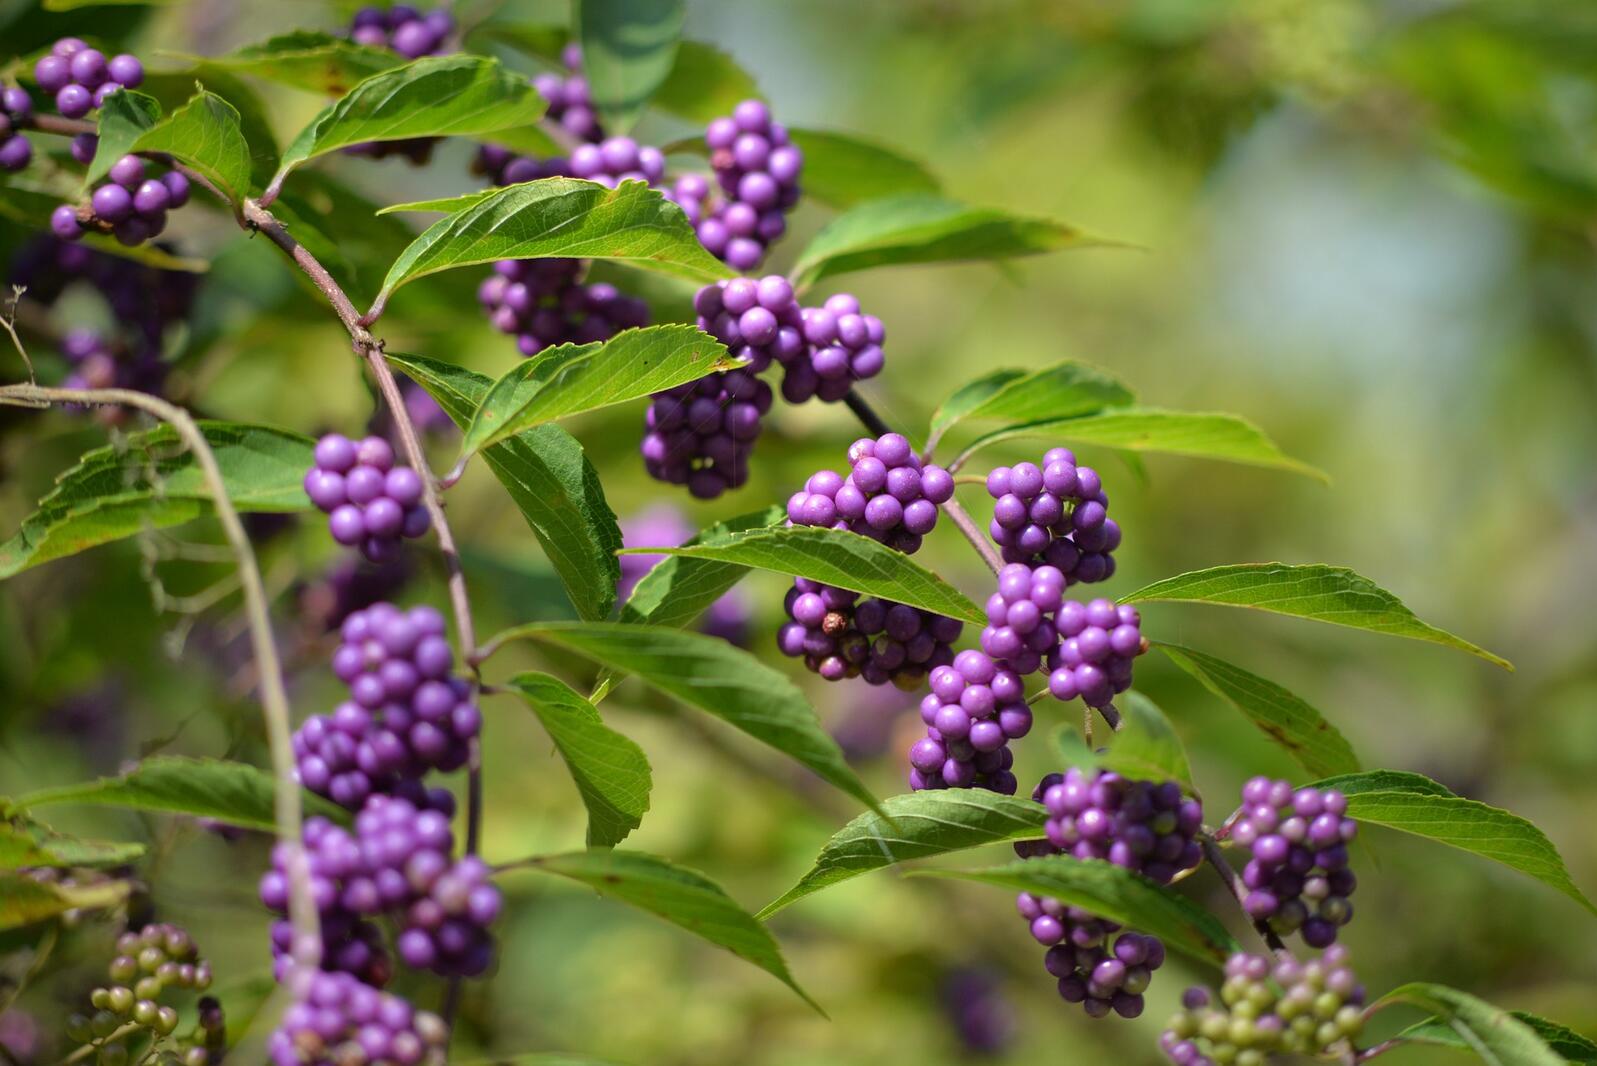 Close-up of an American beautyberry plant.